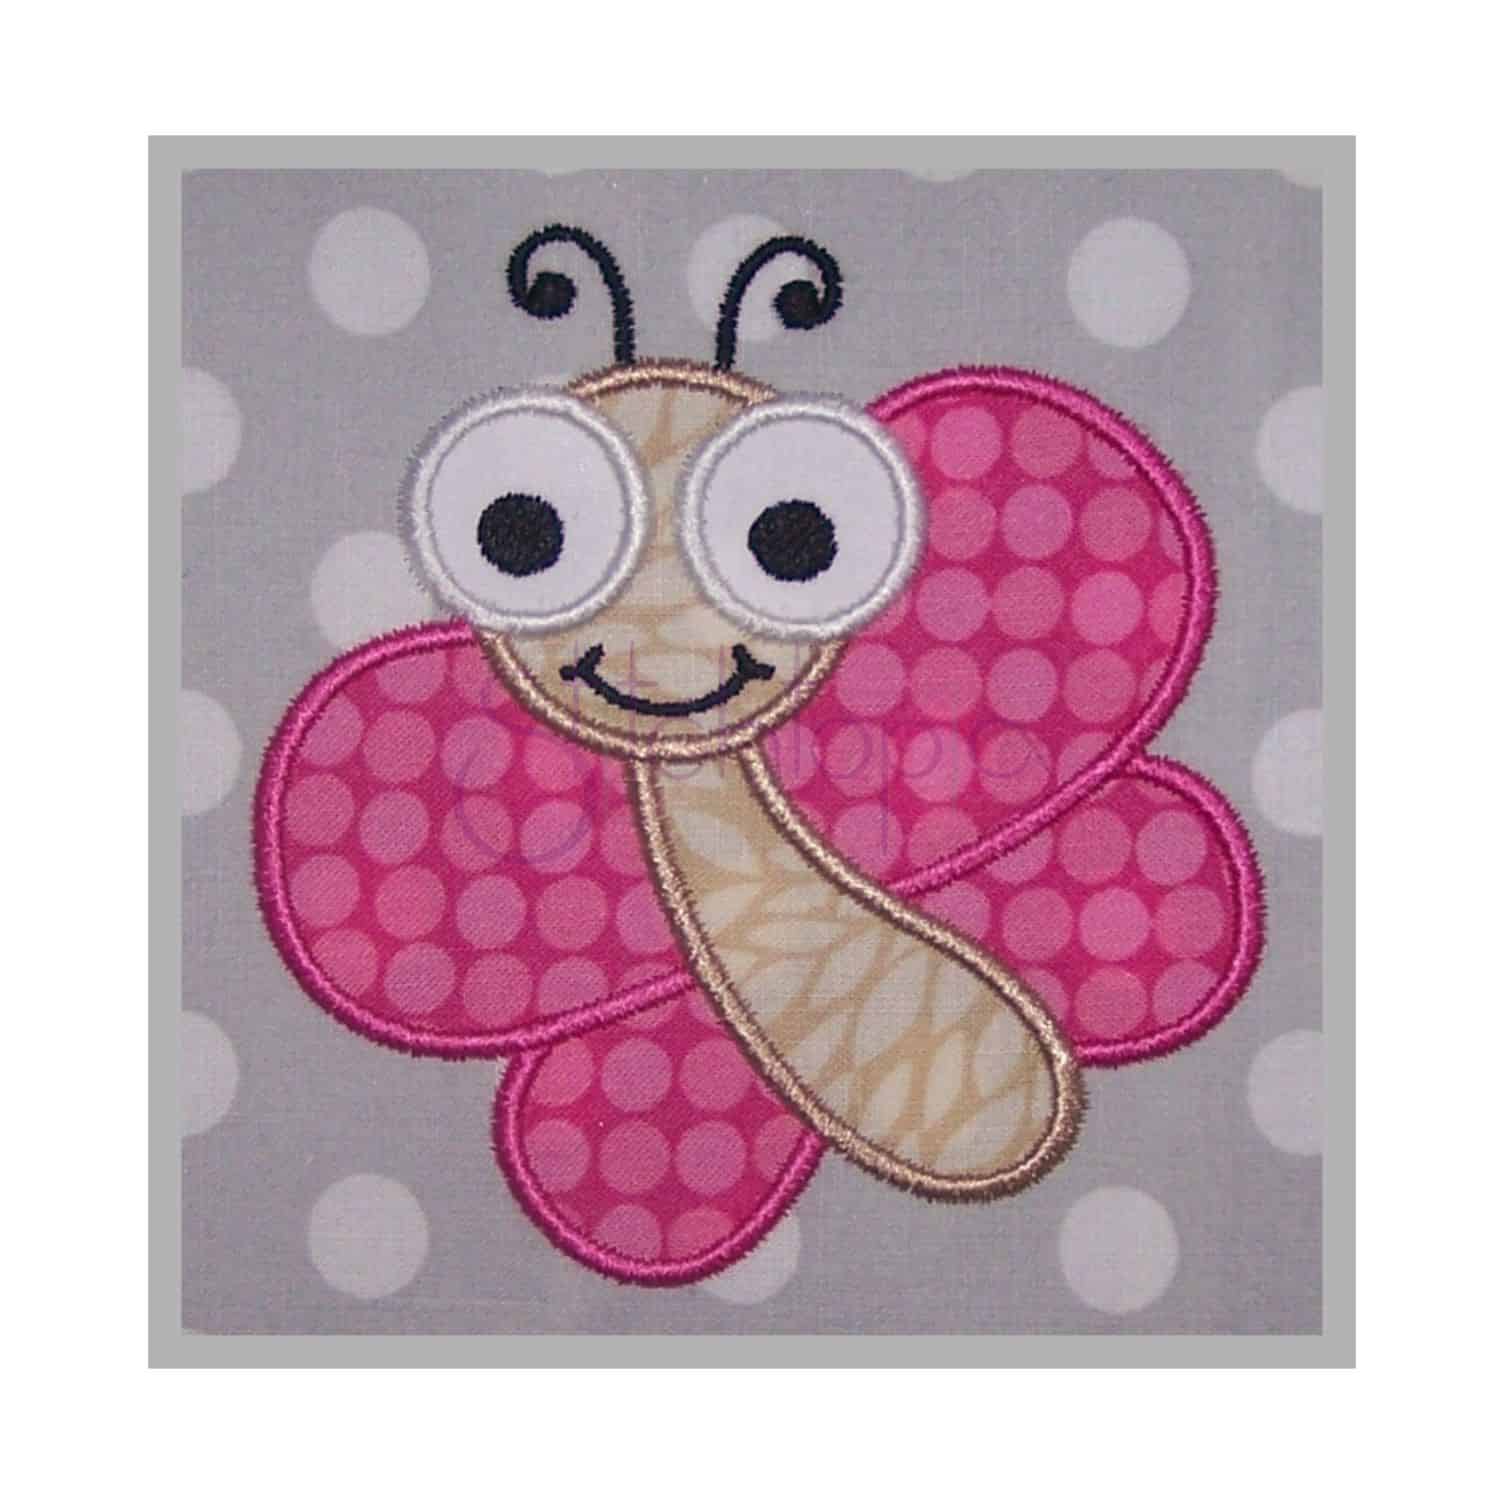 Butterfly Applique